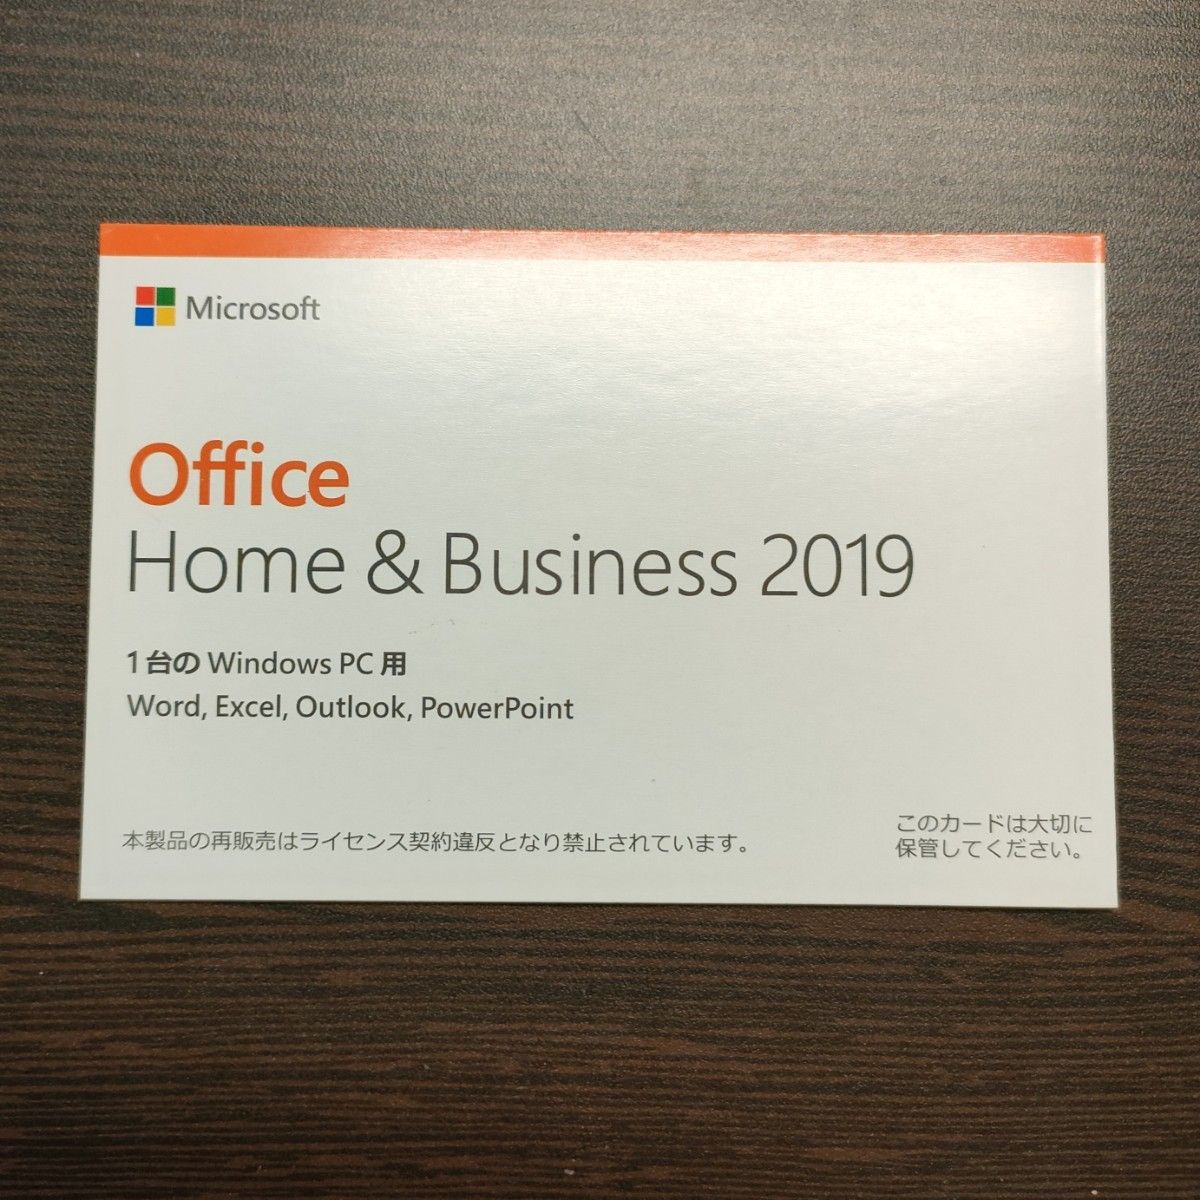 Office Home and Business 2019 3枚｜PayPayフリマ